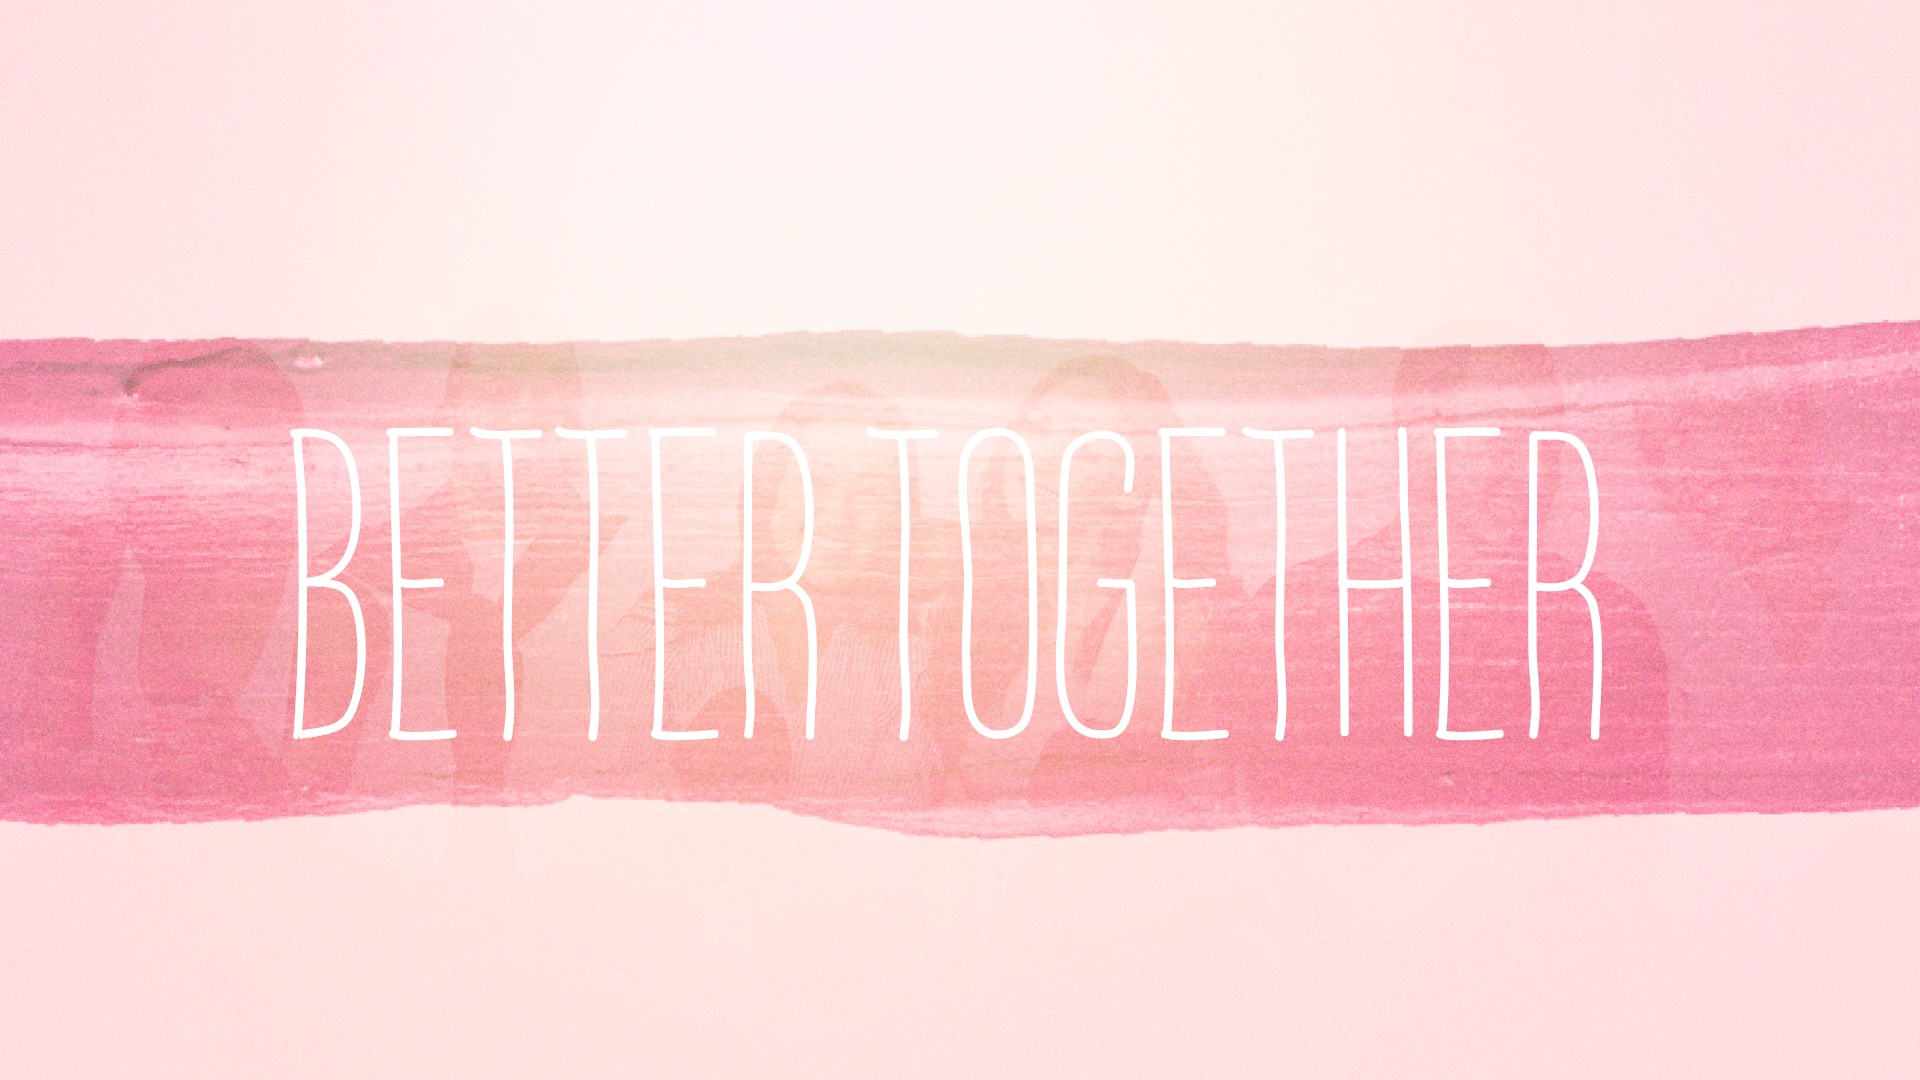 Sermon Graphic on Better together